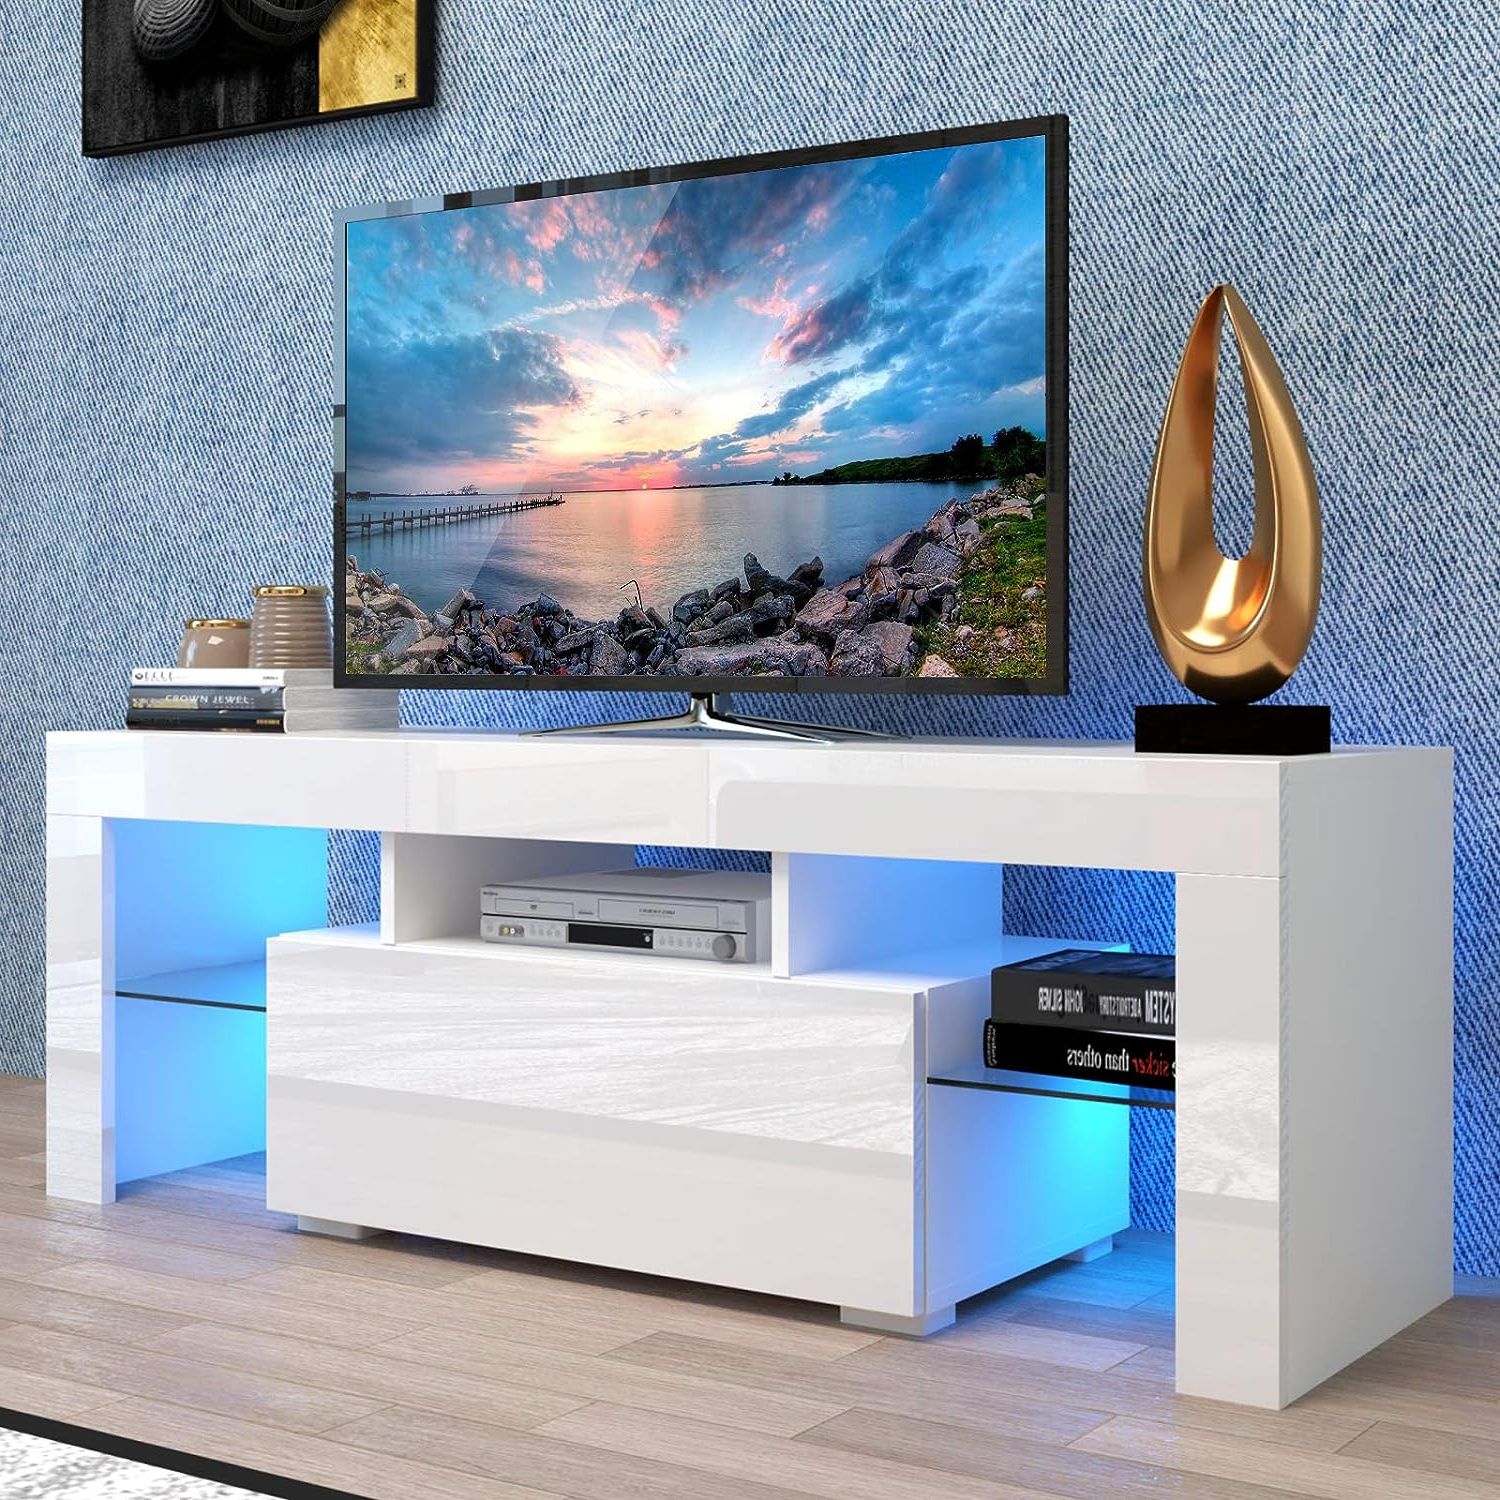 Modern Tv Stand Entertainment Center With 20 Color India | Ubuy With Modern Stands With Shelves (Gallery 11 of 20)